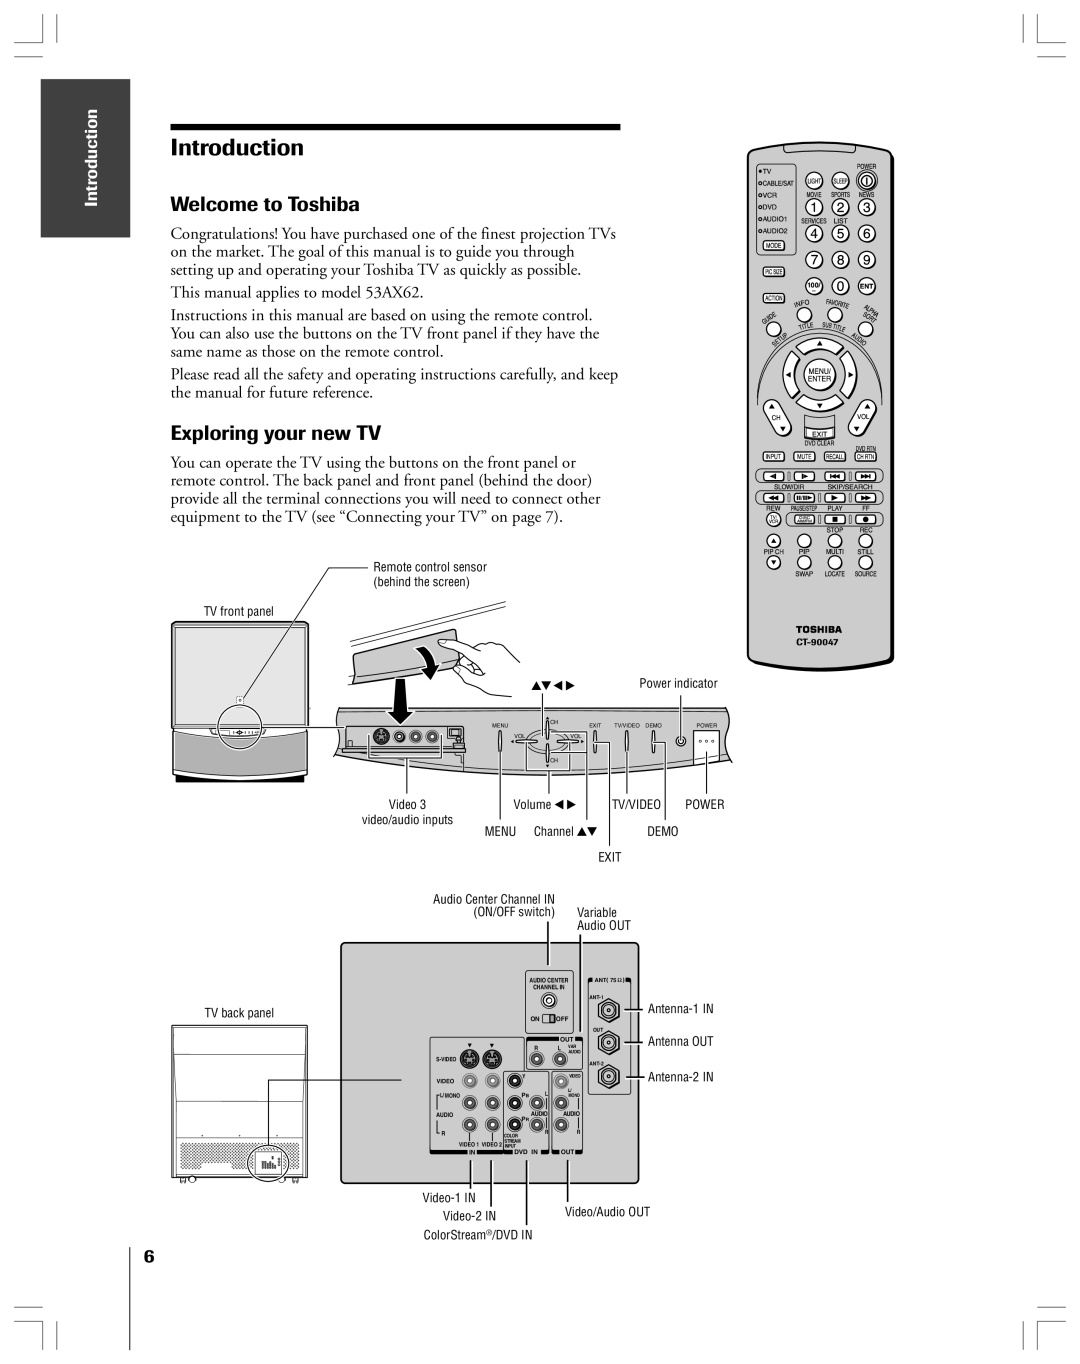 Toshiba 53AX62 owner manual Introduction, Welcome to Toshiba, Exploring your new TV 